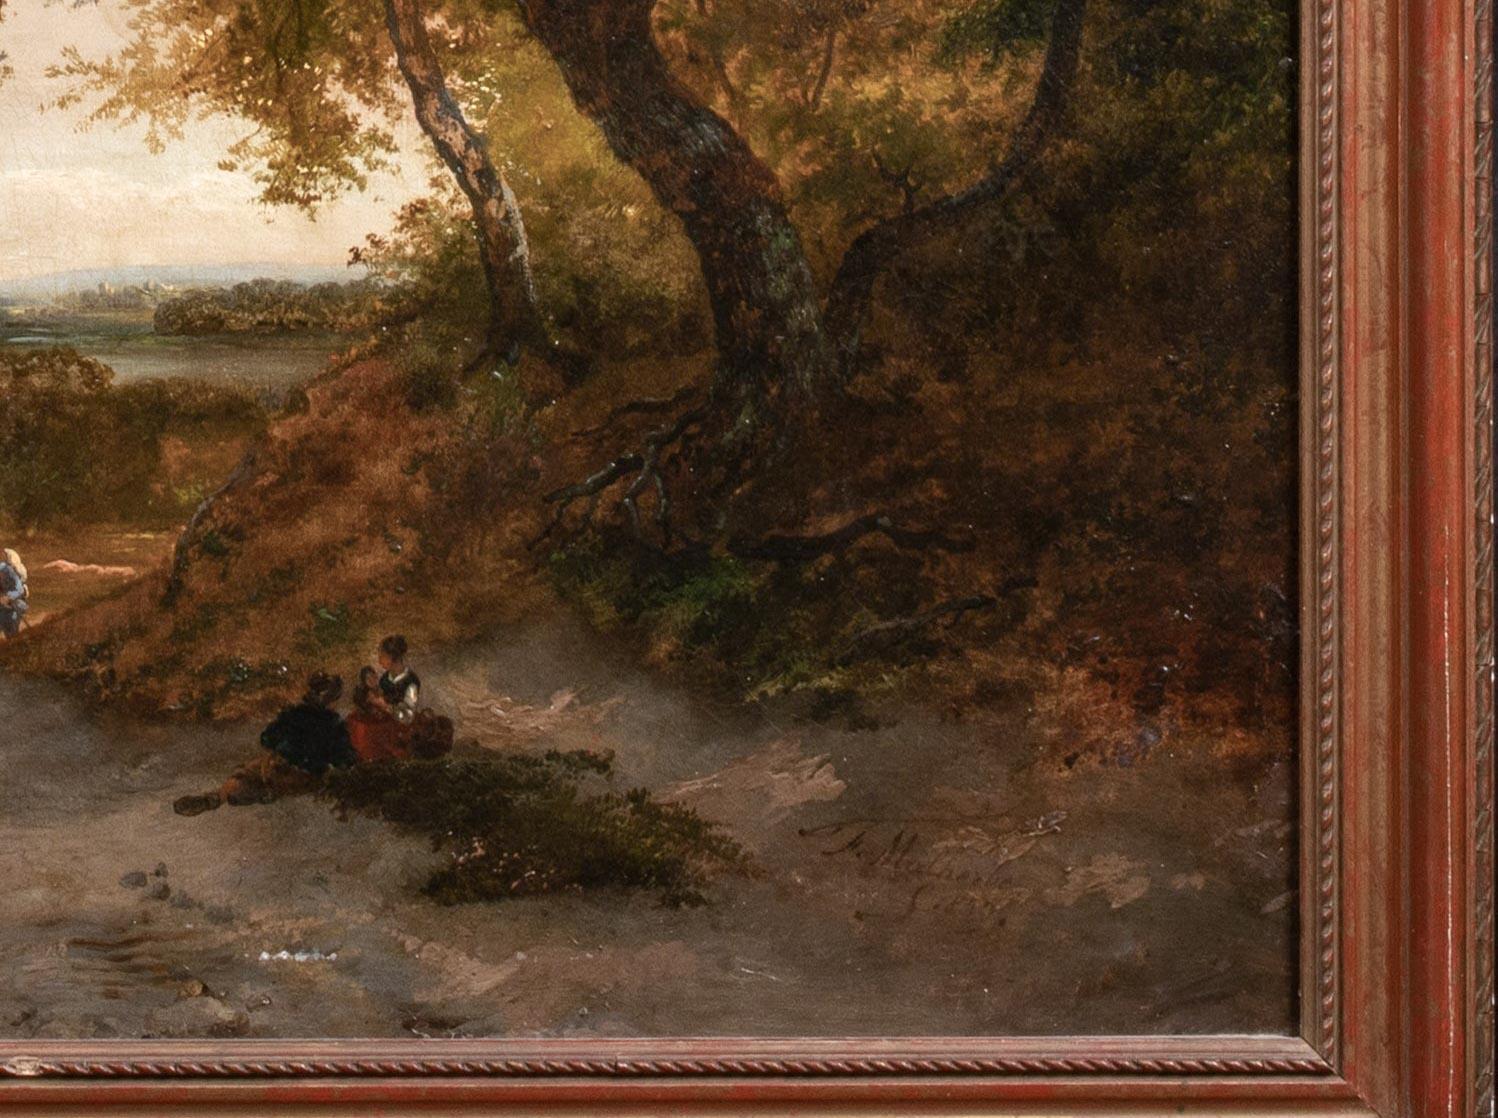 Figures In A Landscape, River Rhine In The Distance, dated 1869

by Adolphe Malherbe

Huge 19th Century German River Rhine landscape with figures working in the foreground, oil on canvas. Excellent quality and extensively detailed view of figures in